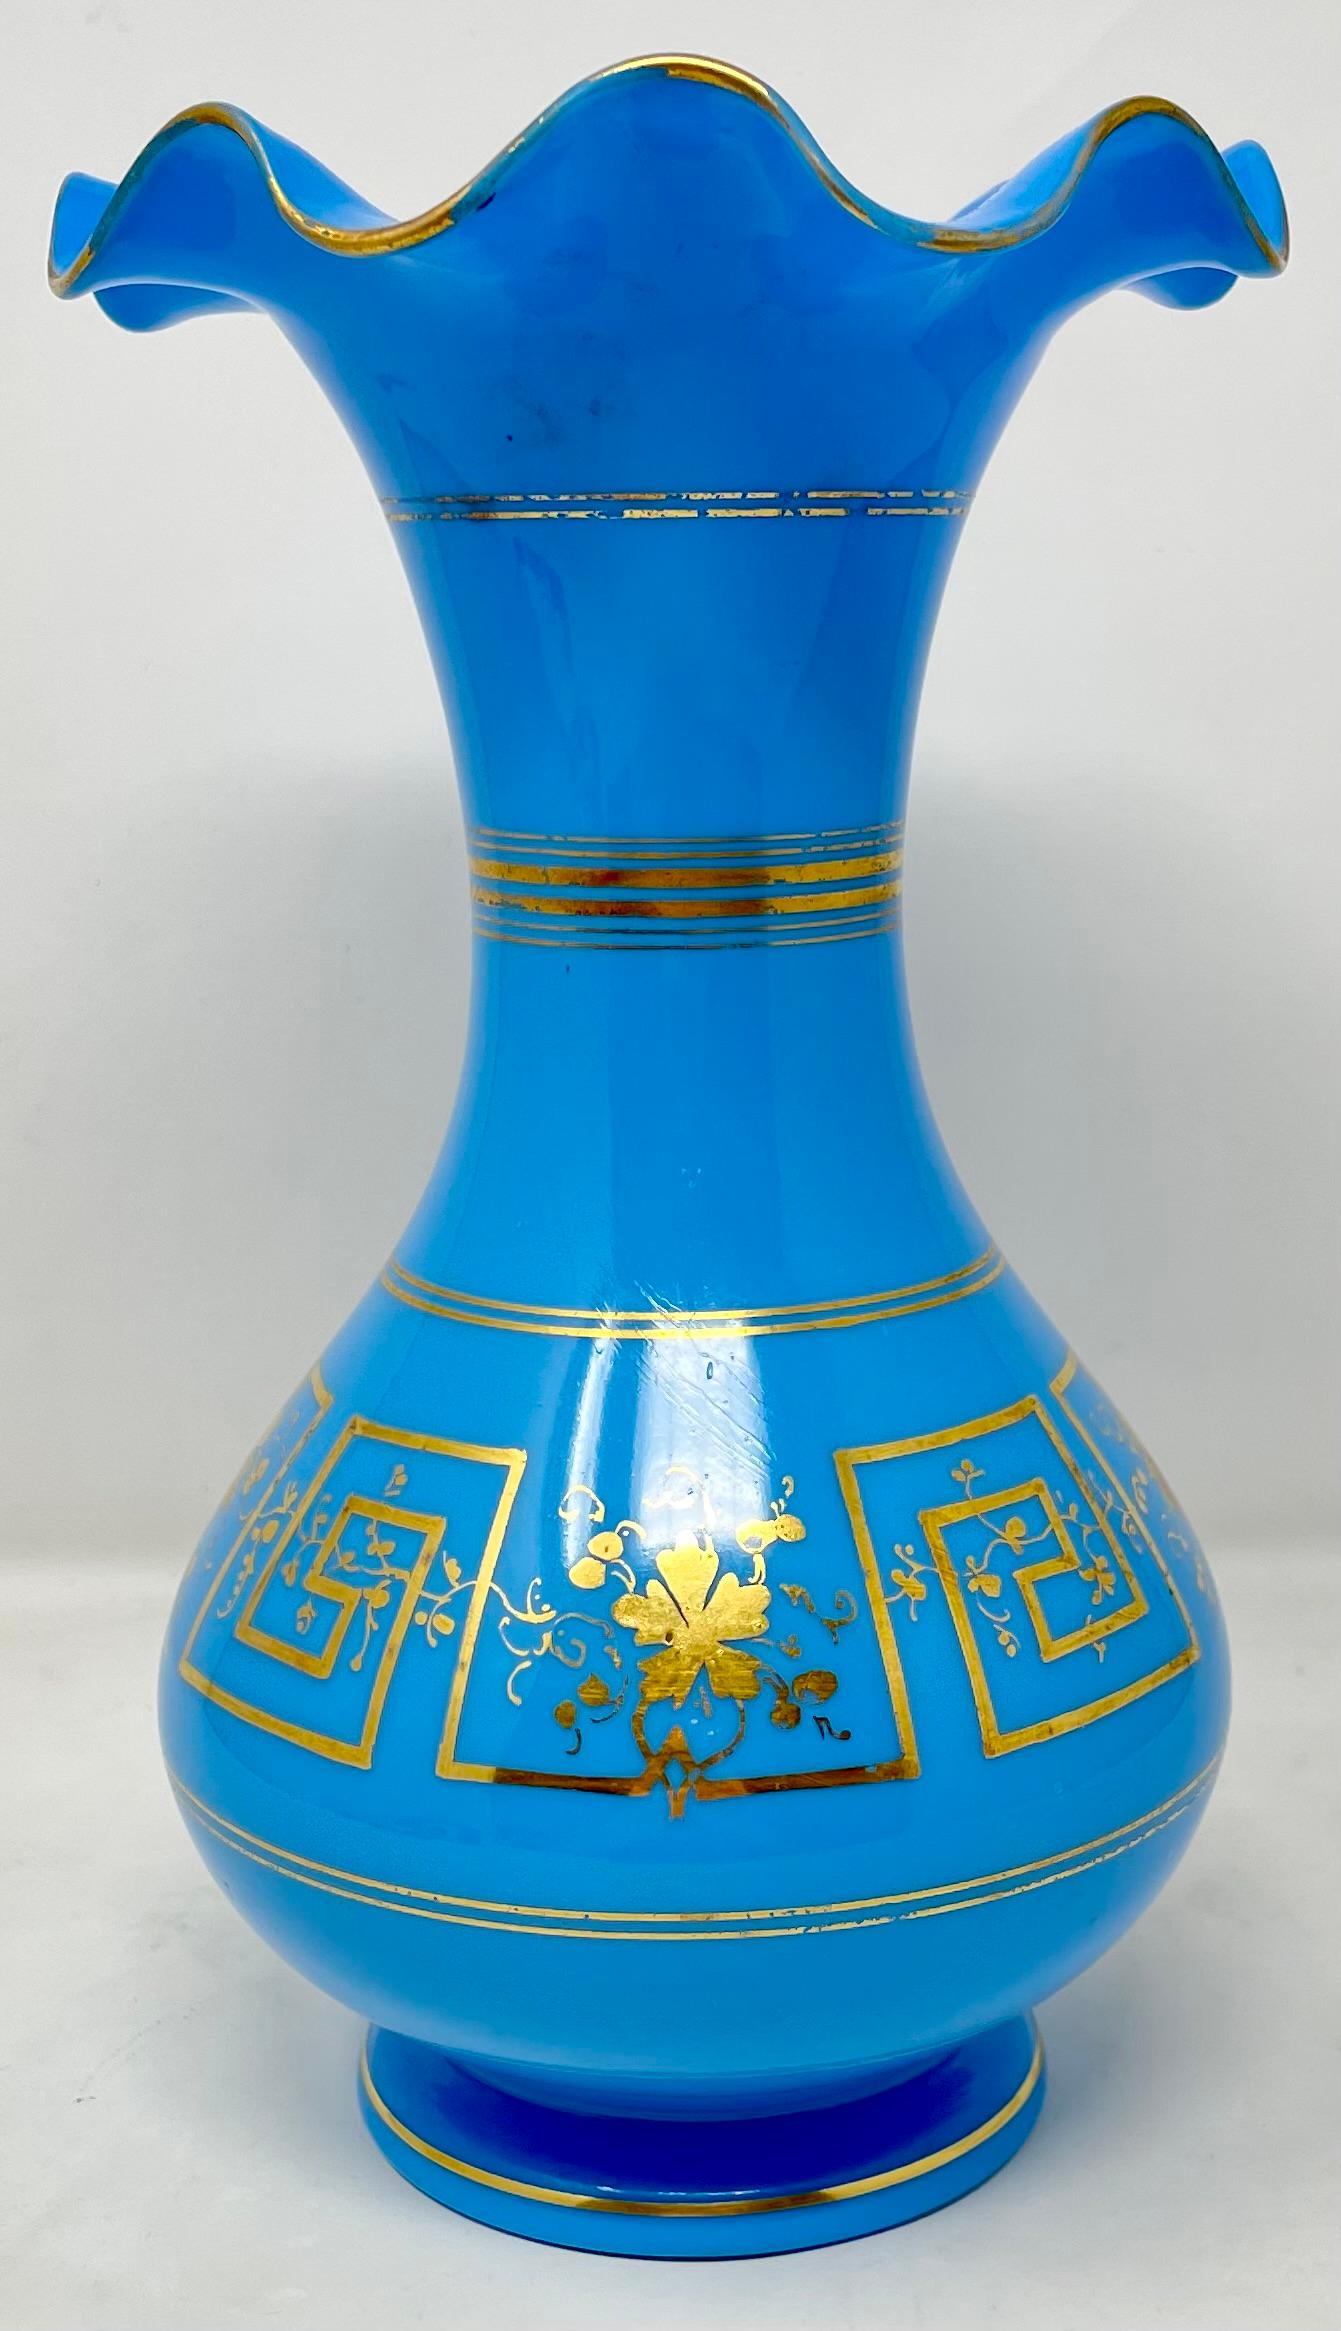 Pair Antique Early 19th century French Empire Period blue & gold opaline glass vases.